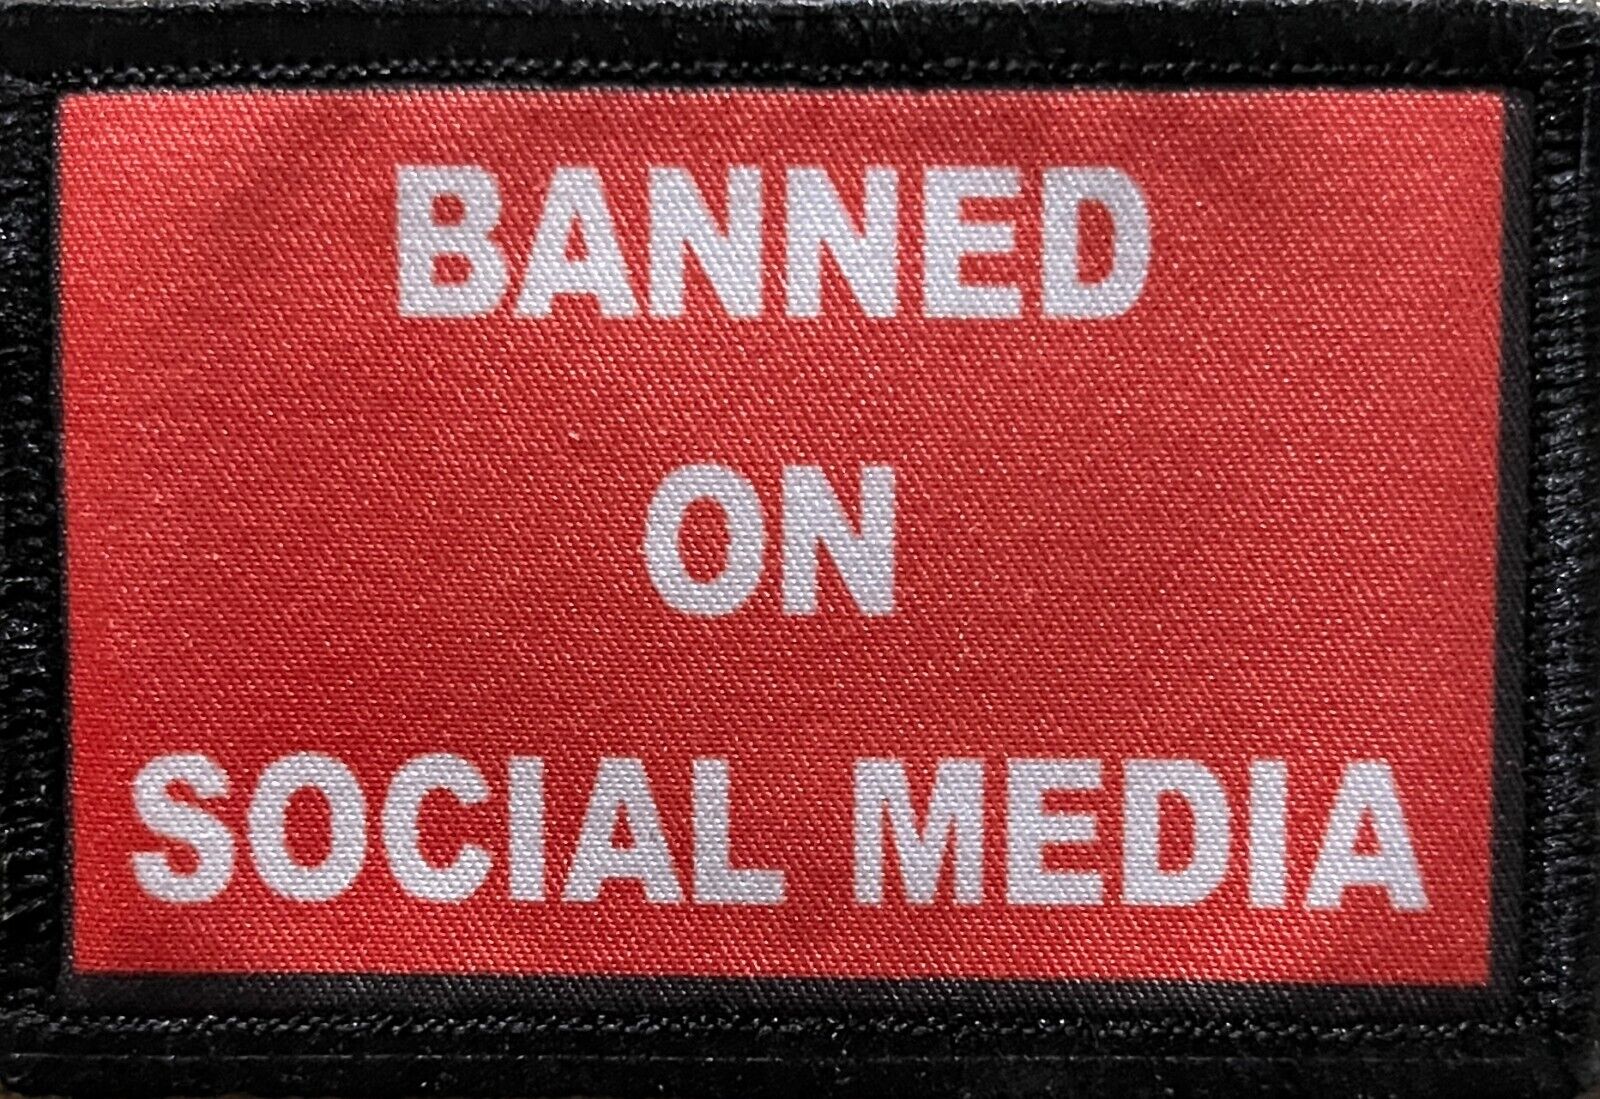 Banned on Social Media Morale Patch Tactical ARMY Hook Military USA Badge Flag